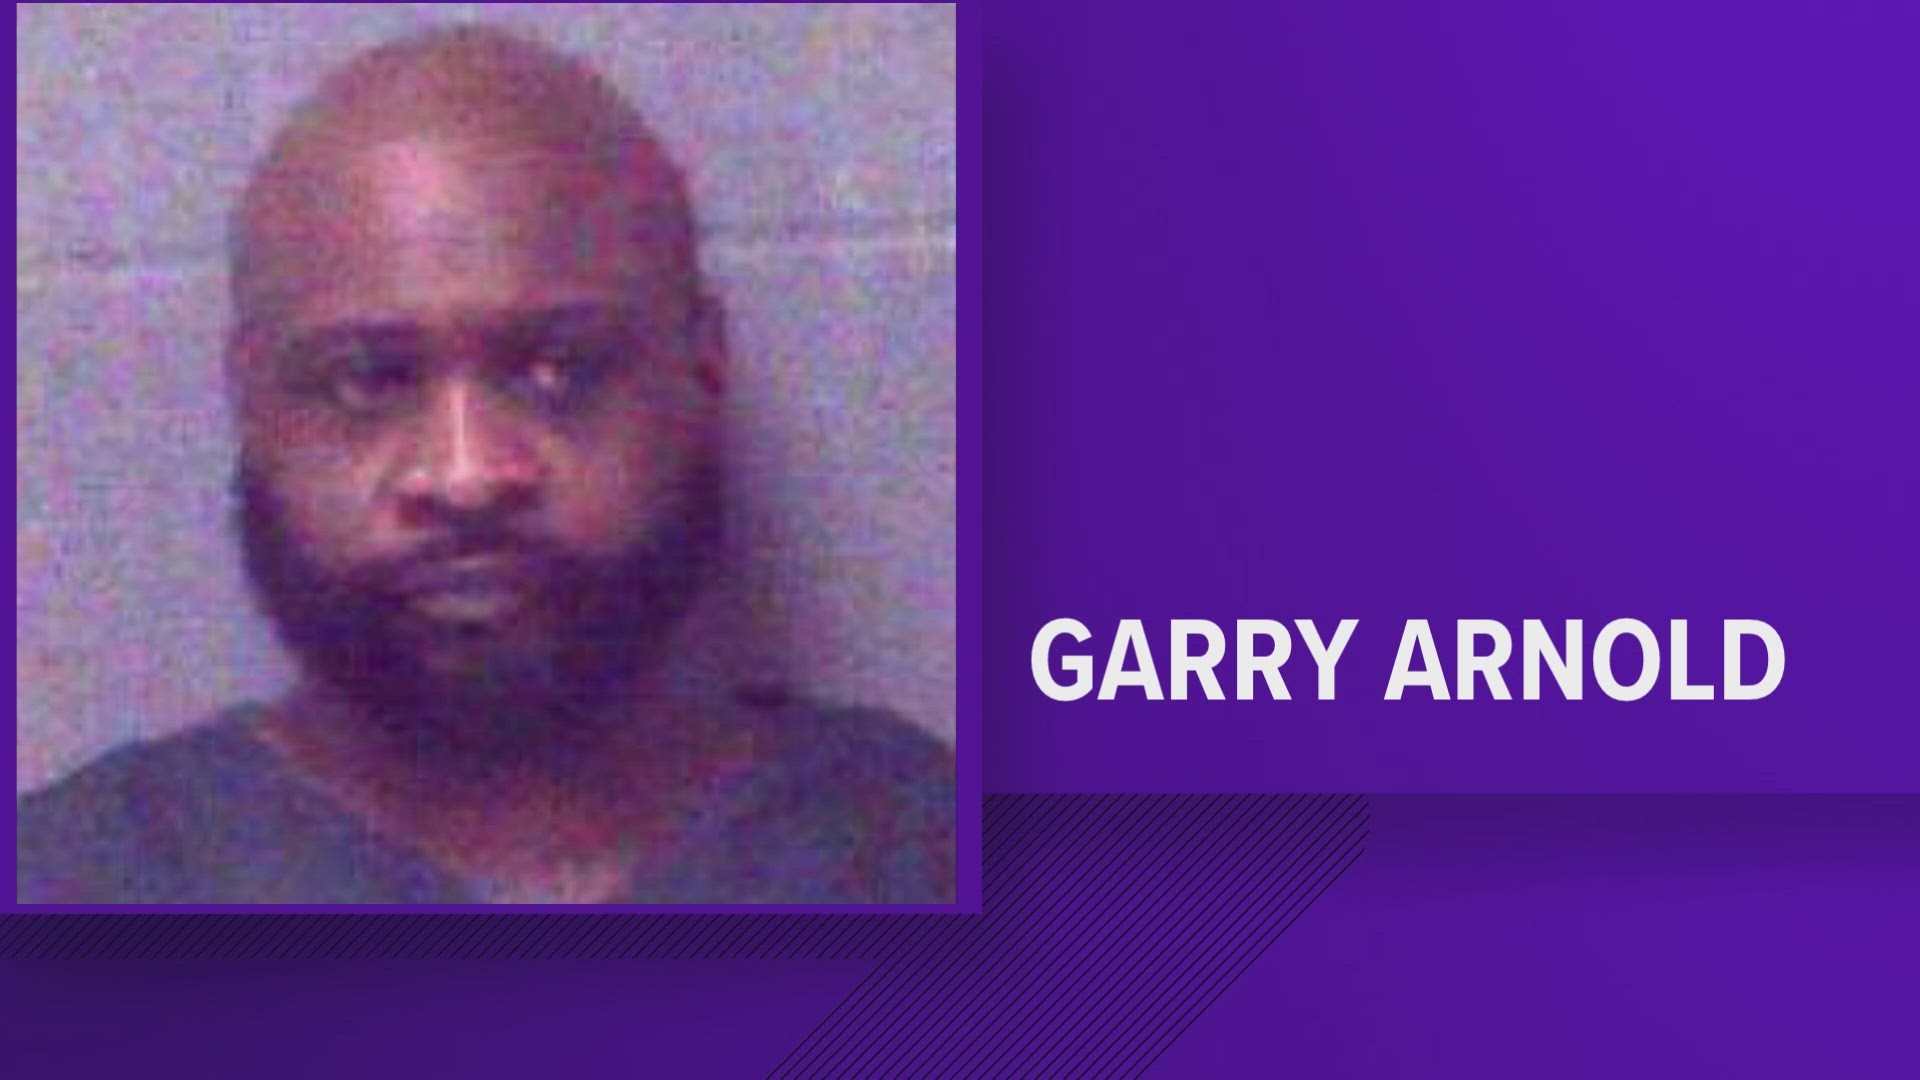 MPD said they received a call from police in Arkansas about 8 p.m. Wednesday, Nov. 22, 2023, that Garry Arnold was in custody for DUI.